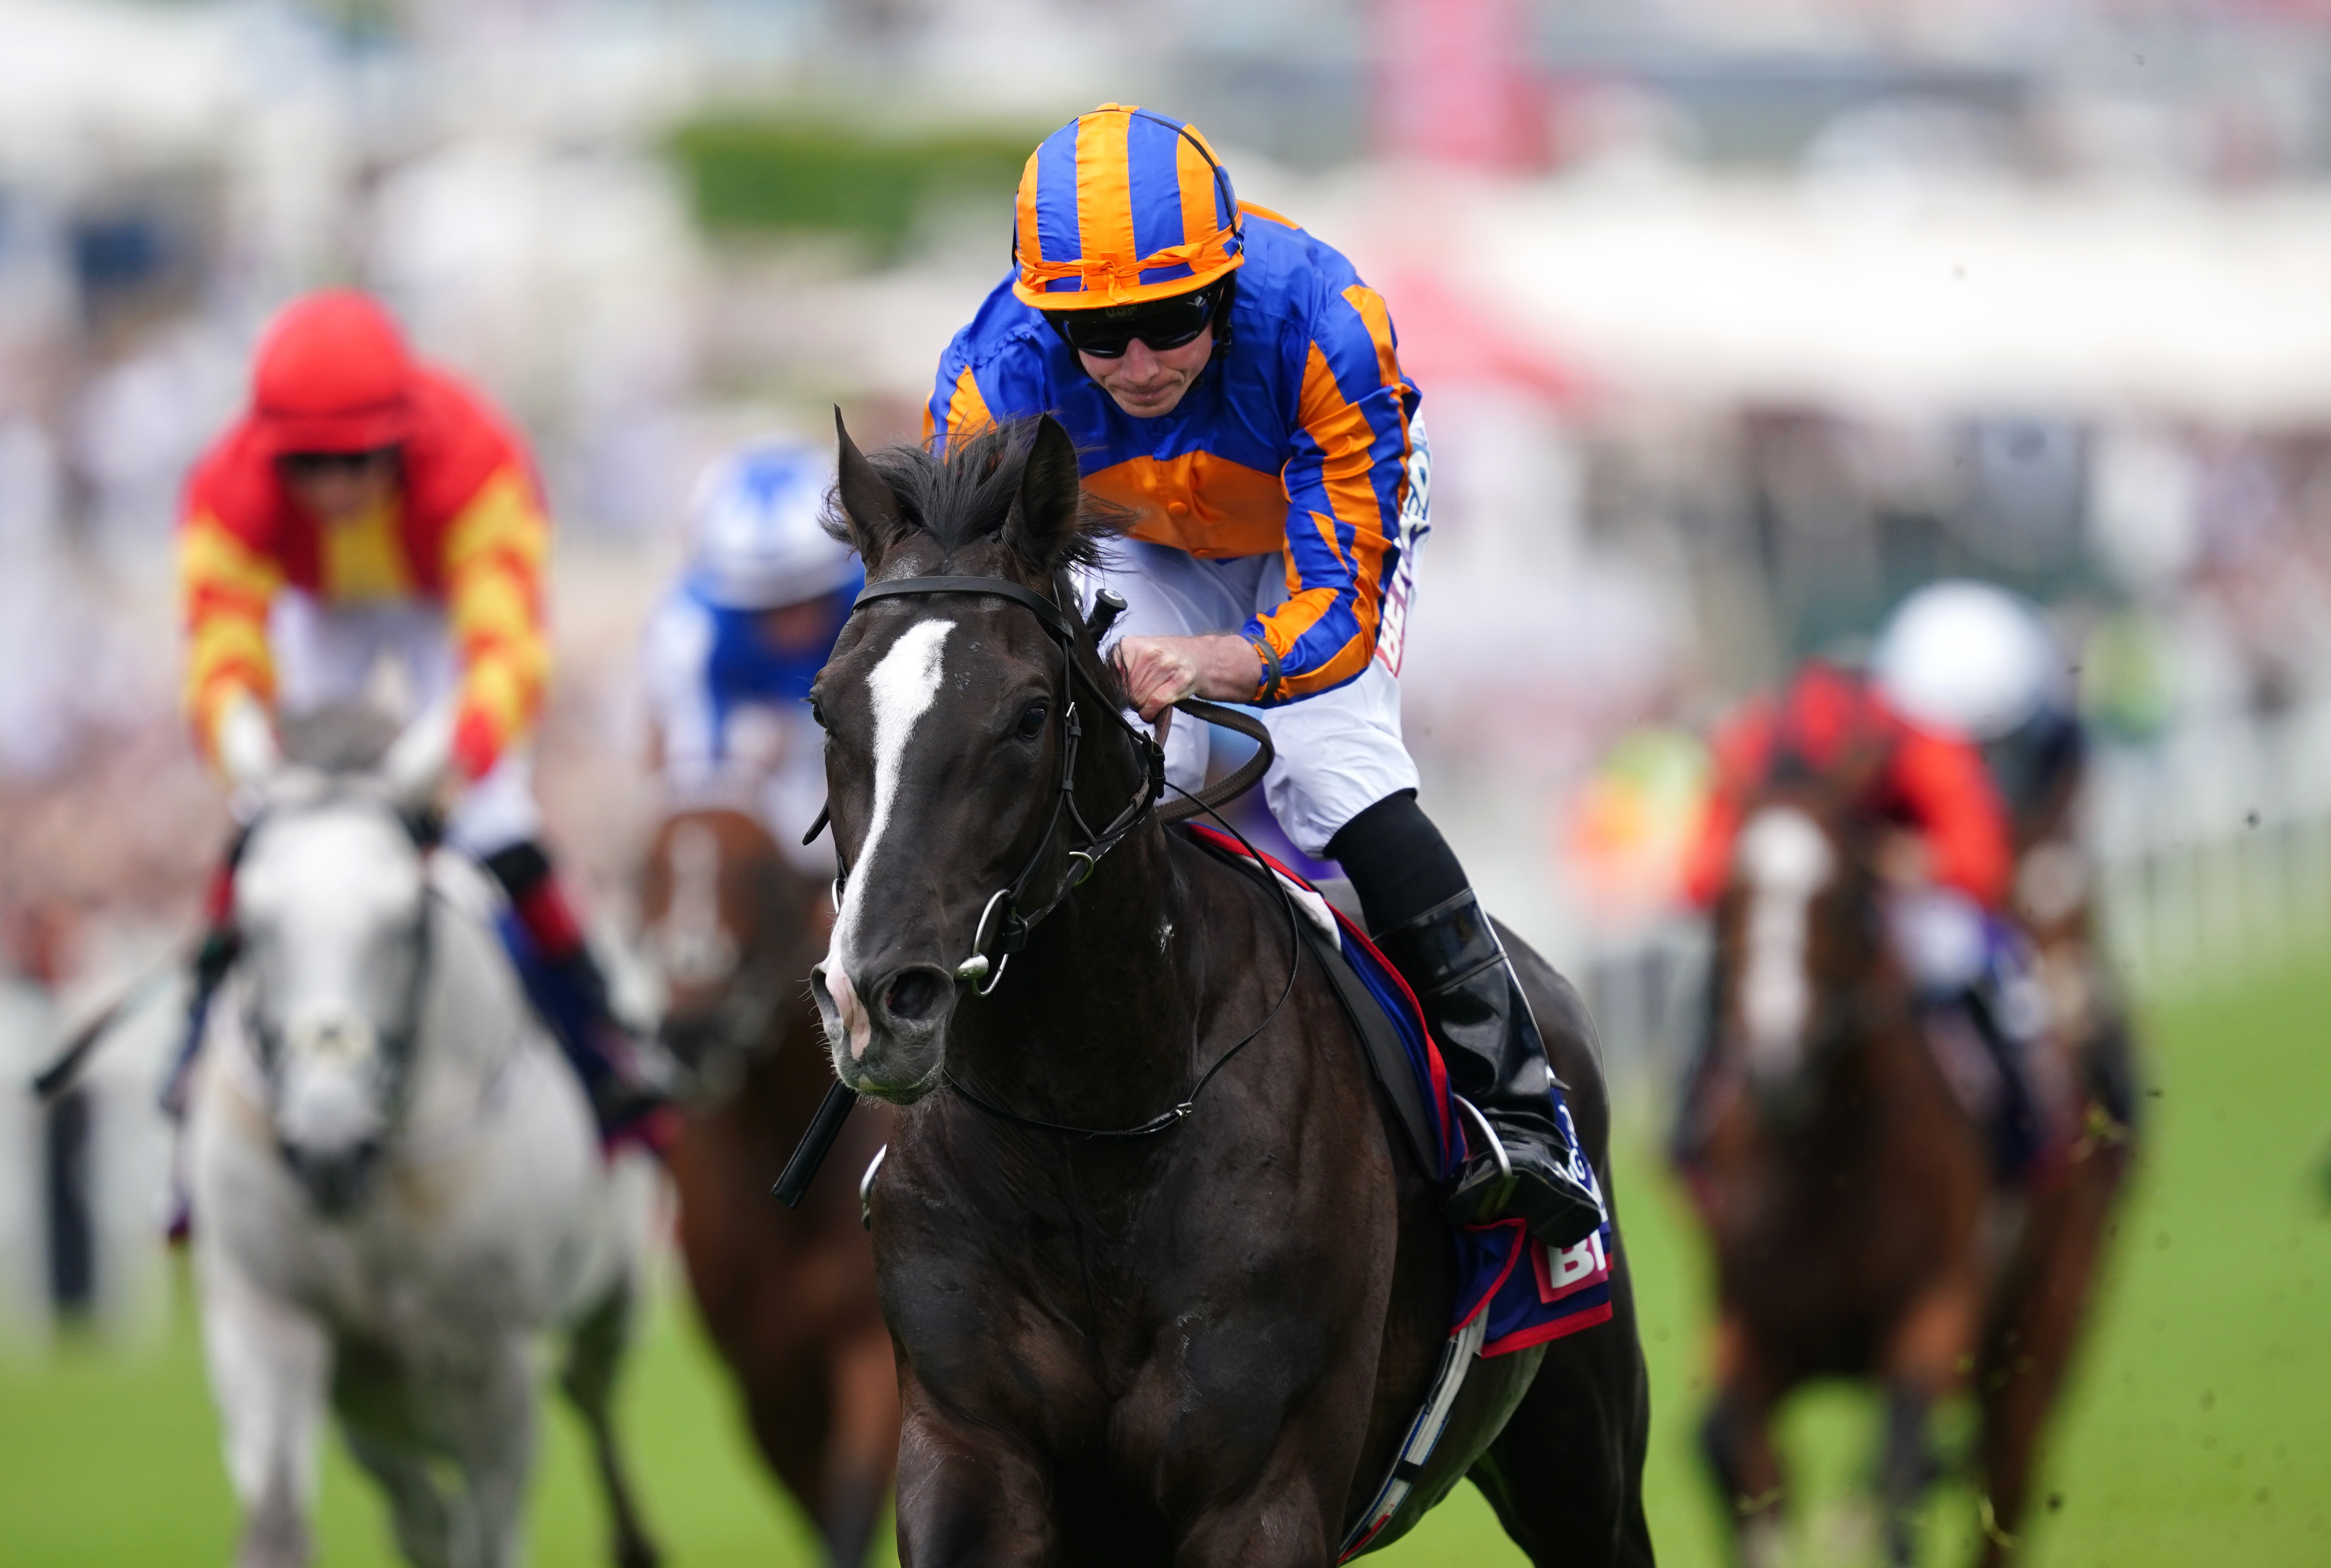 Auguste Rodin and Ryan Moore won the Derby